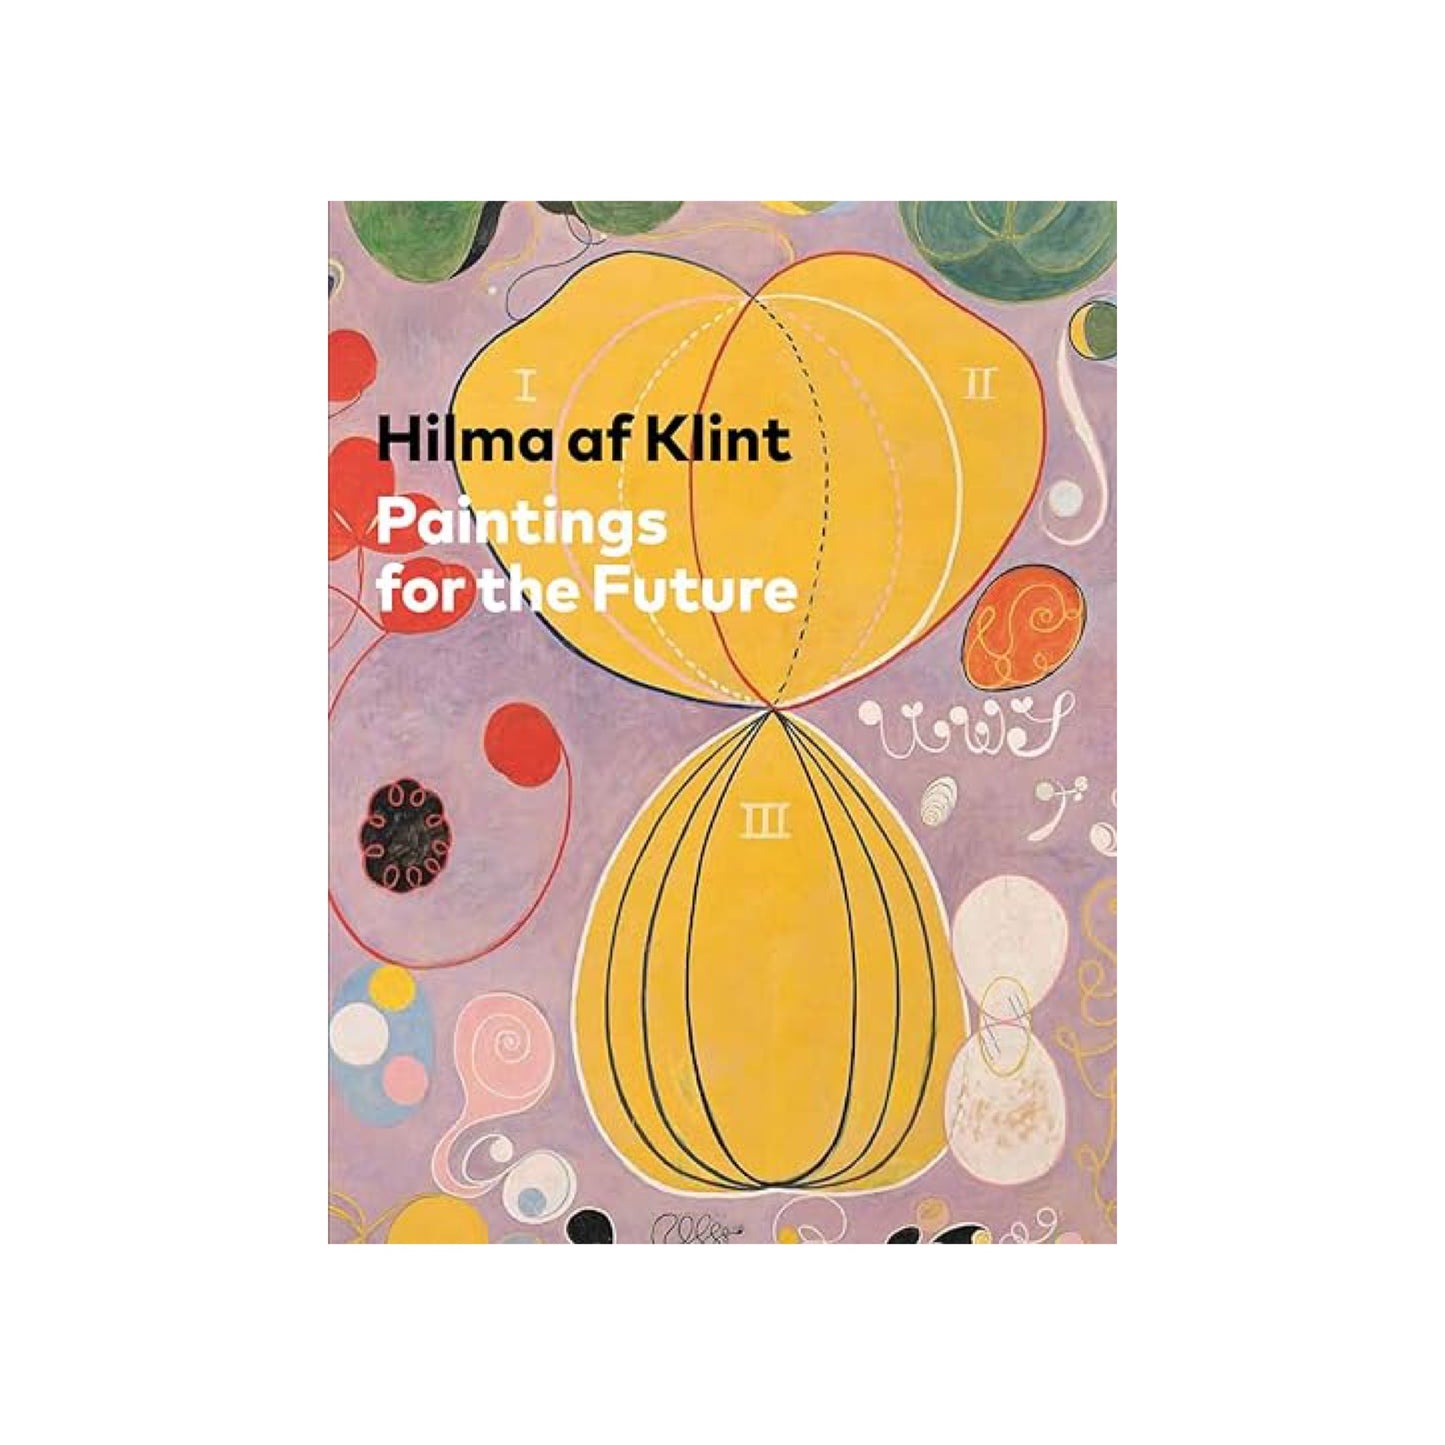 hilma af klint: paintings for the future